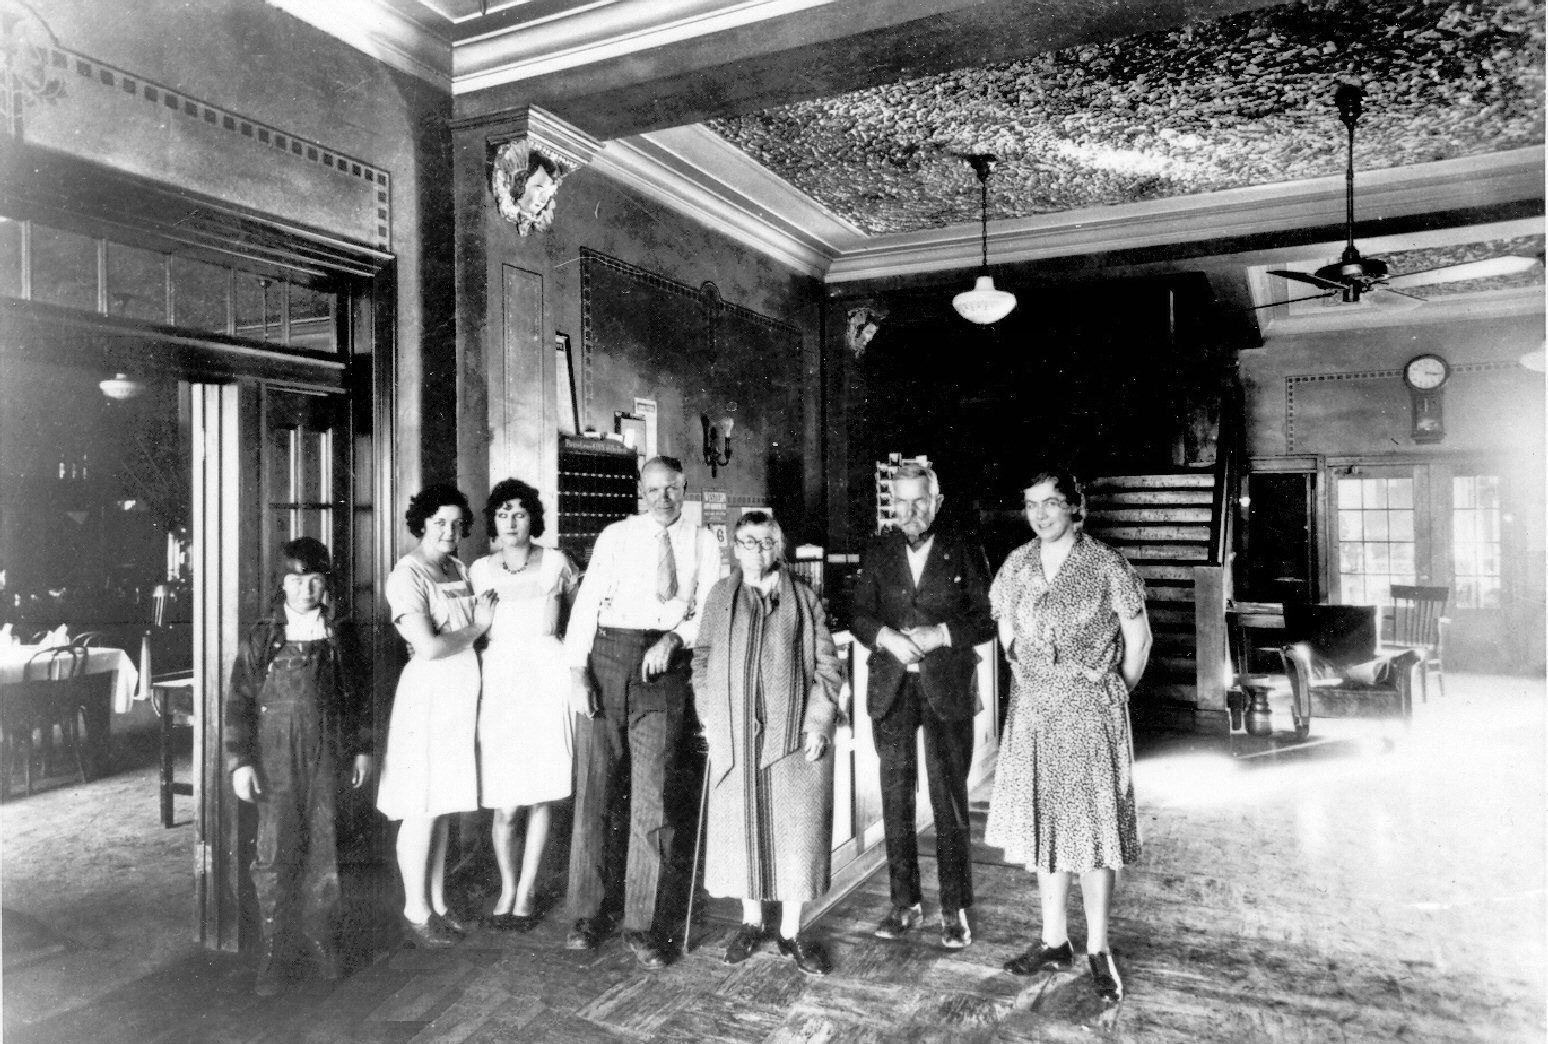 WCHS-01077 People in the lobby of the Arrowhead Hotel